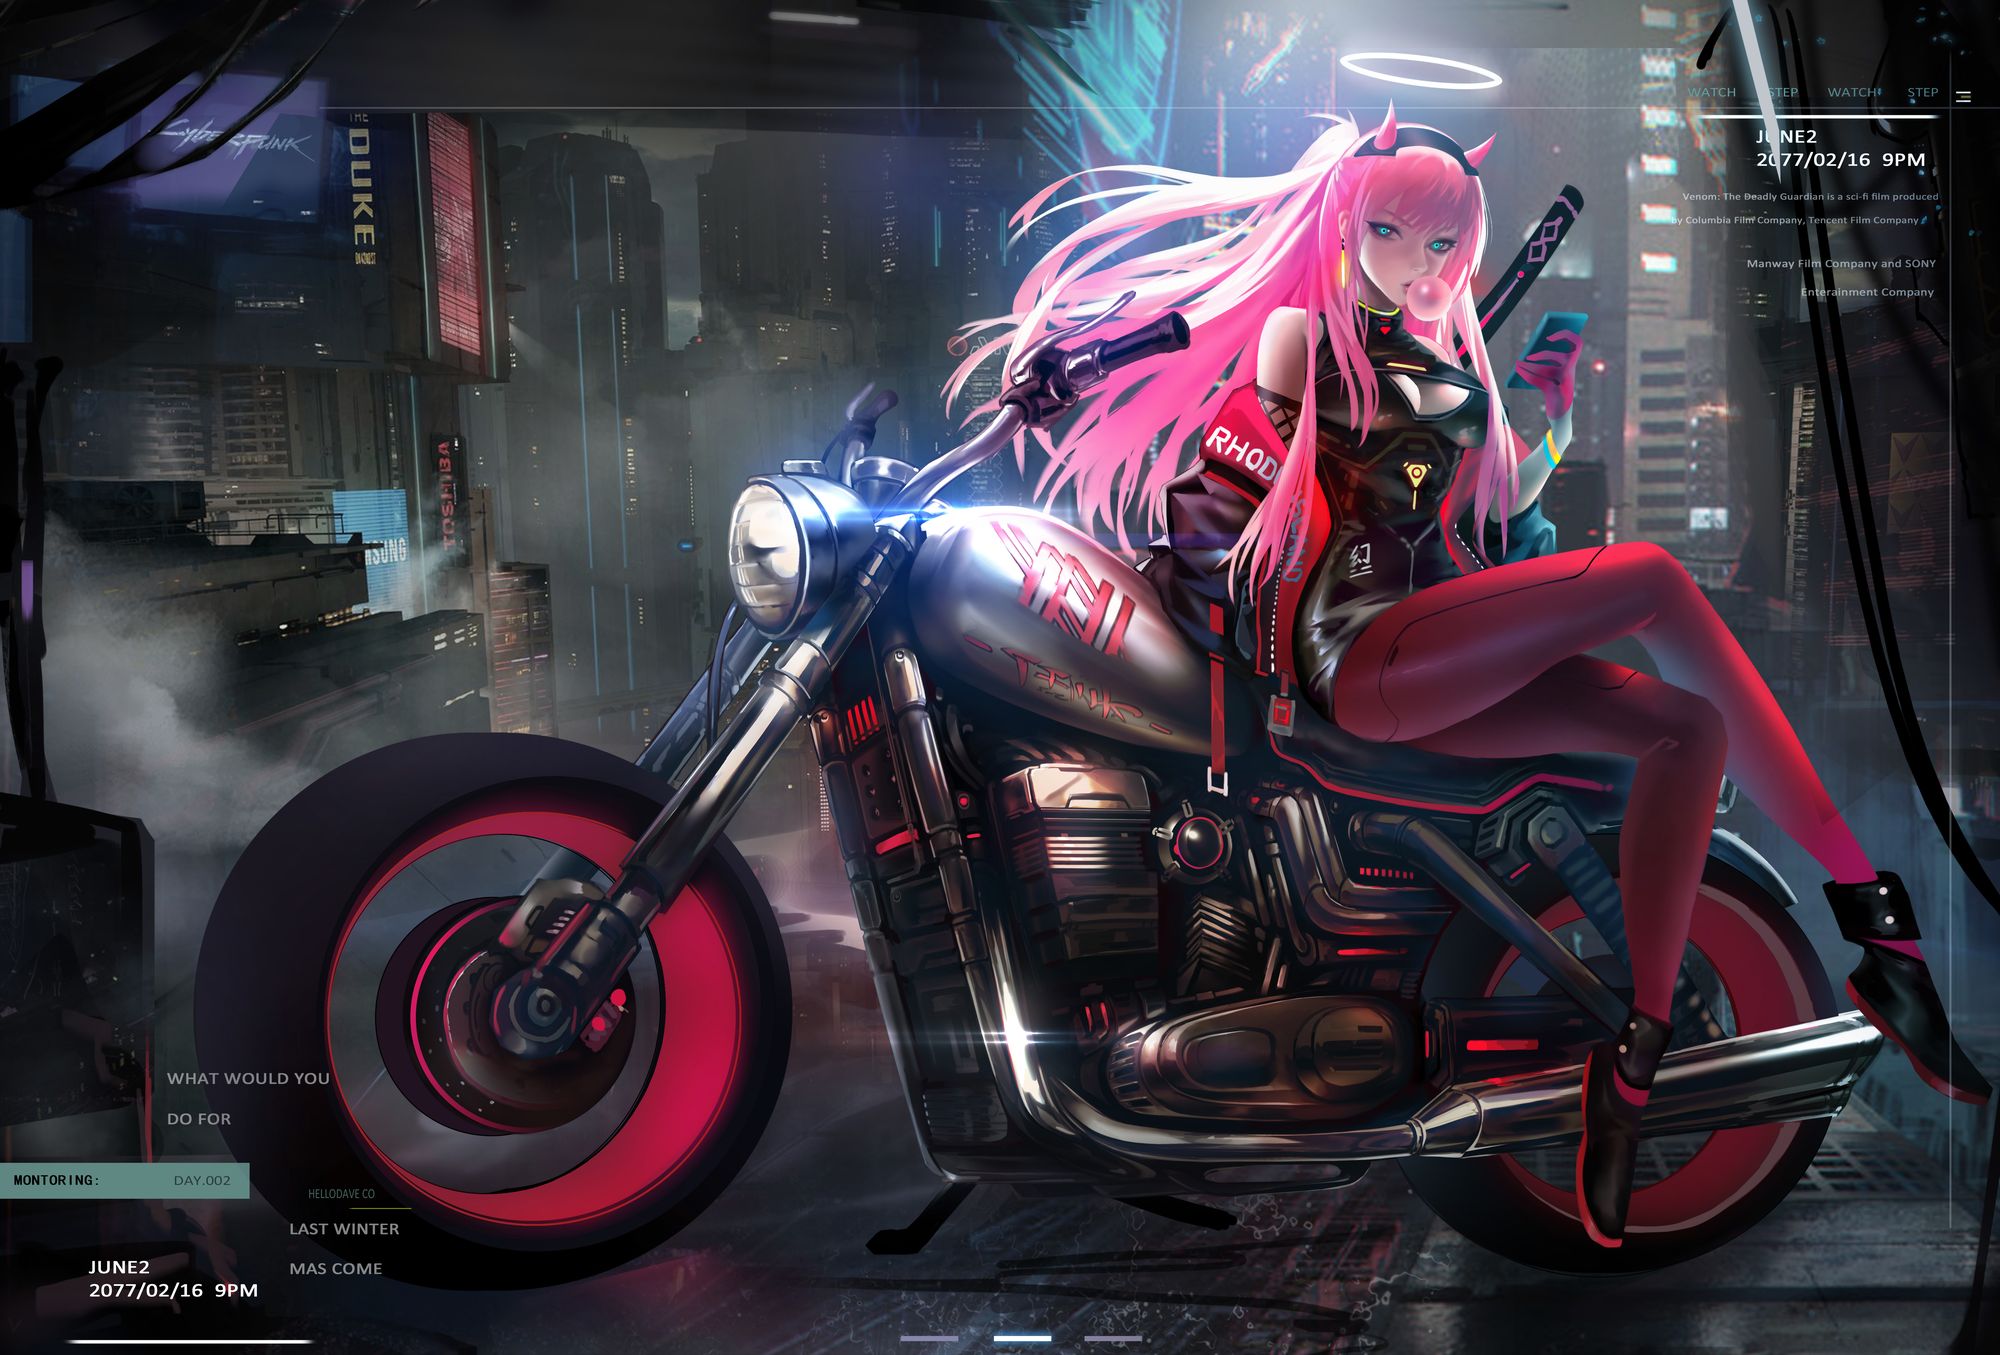 Wallpaper: Anime girl Zero Two (002) on a Motorcycle [Artist: gin79] in the Franxx Clan [anime pics & digital art]